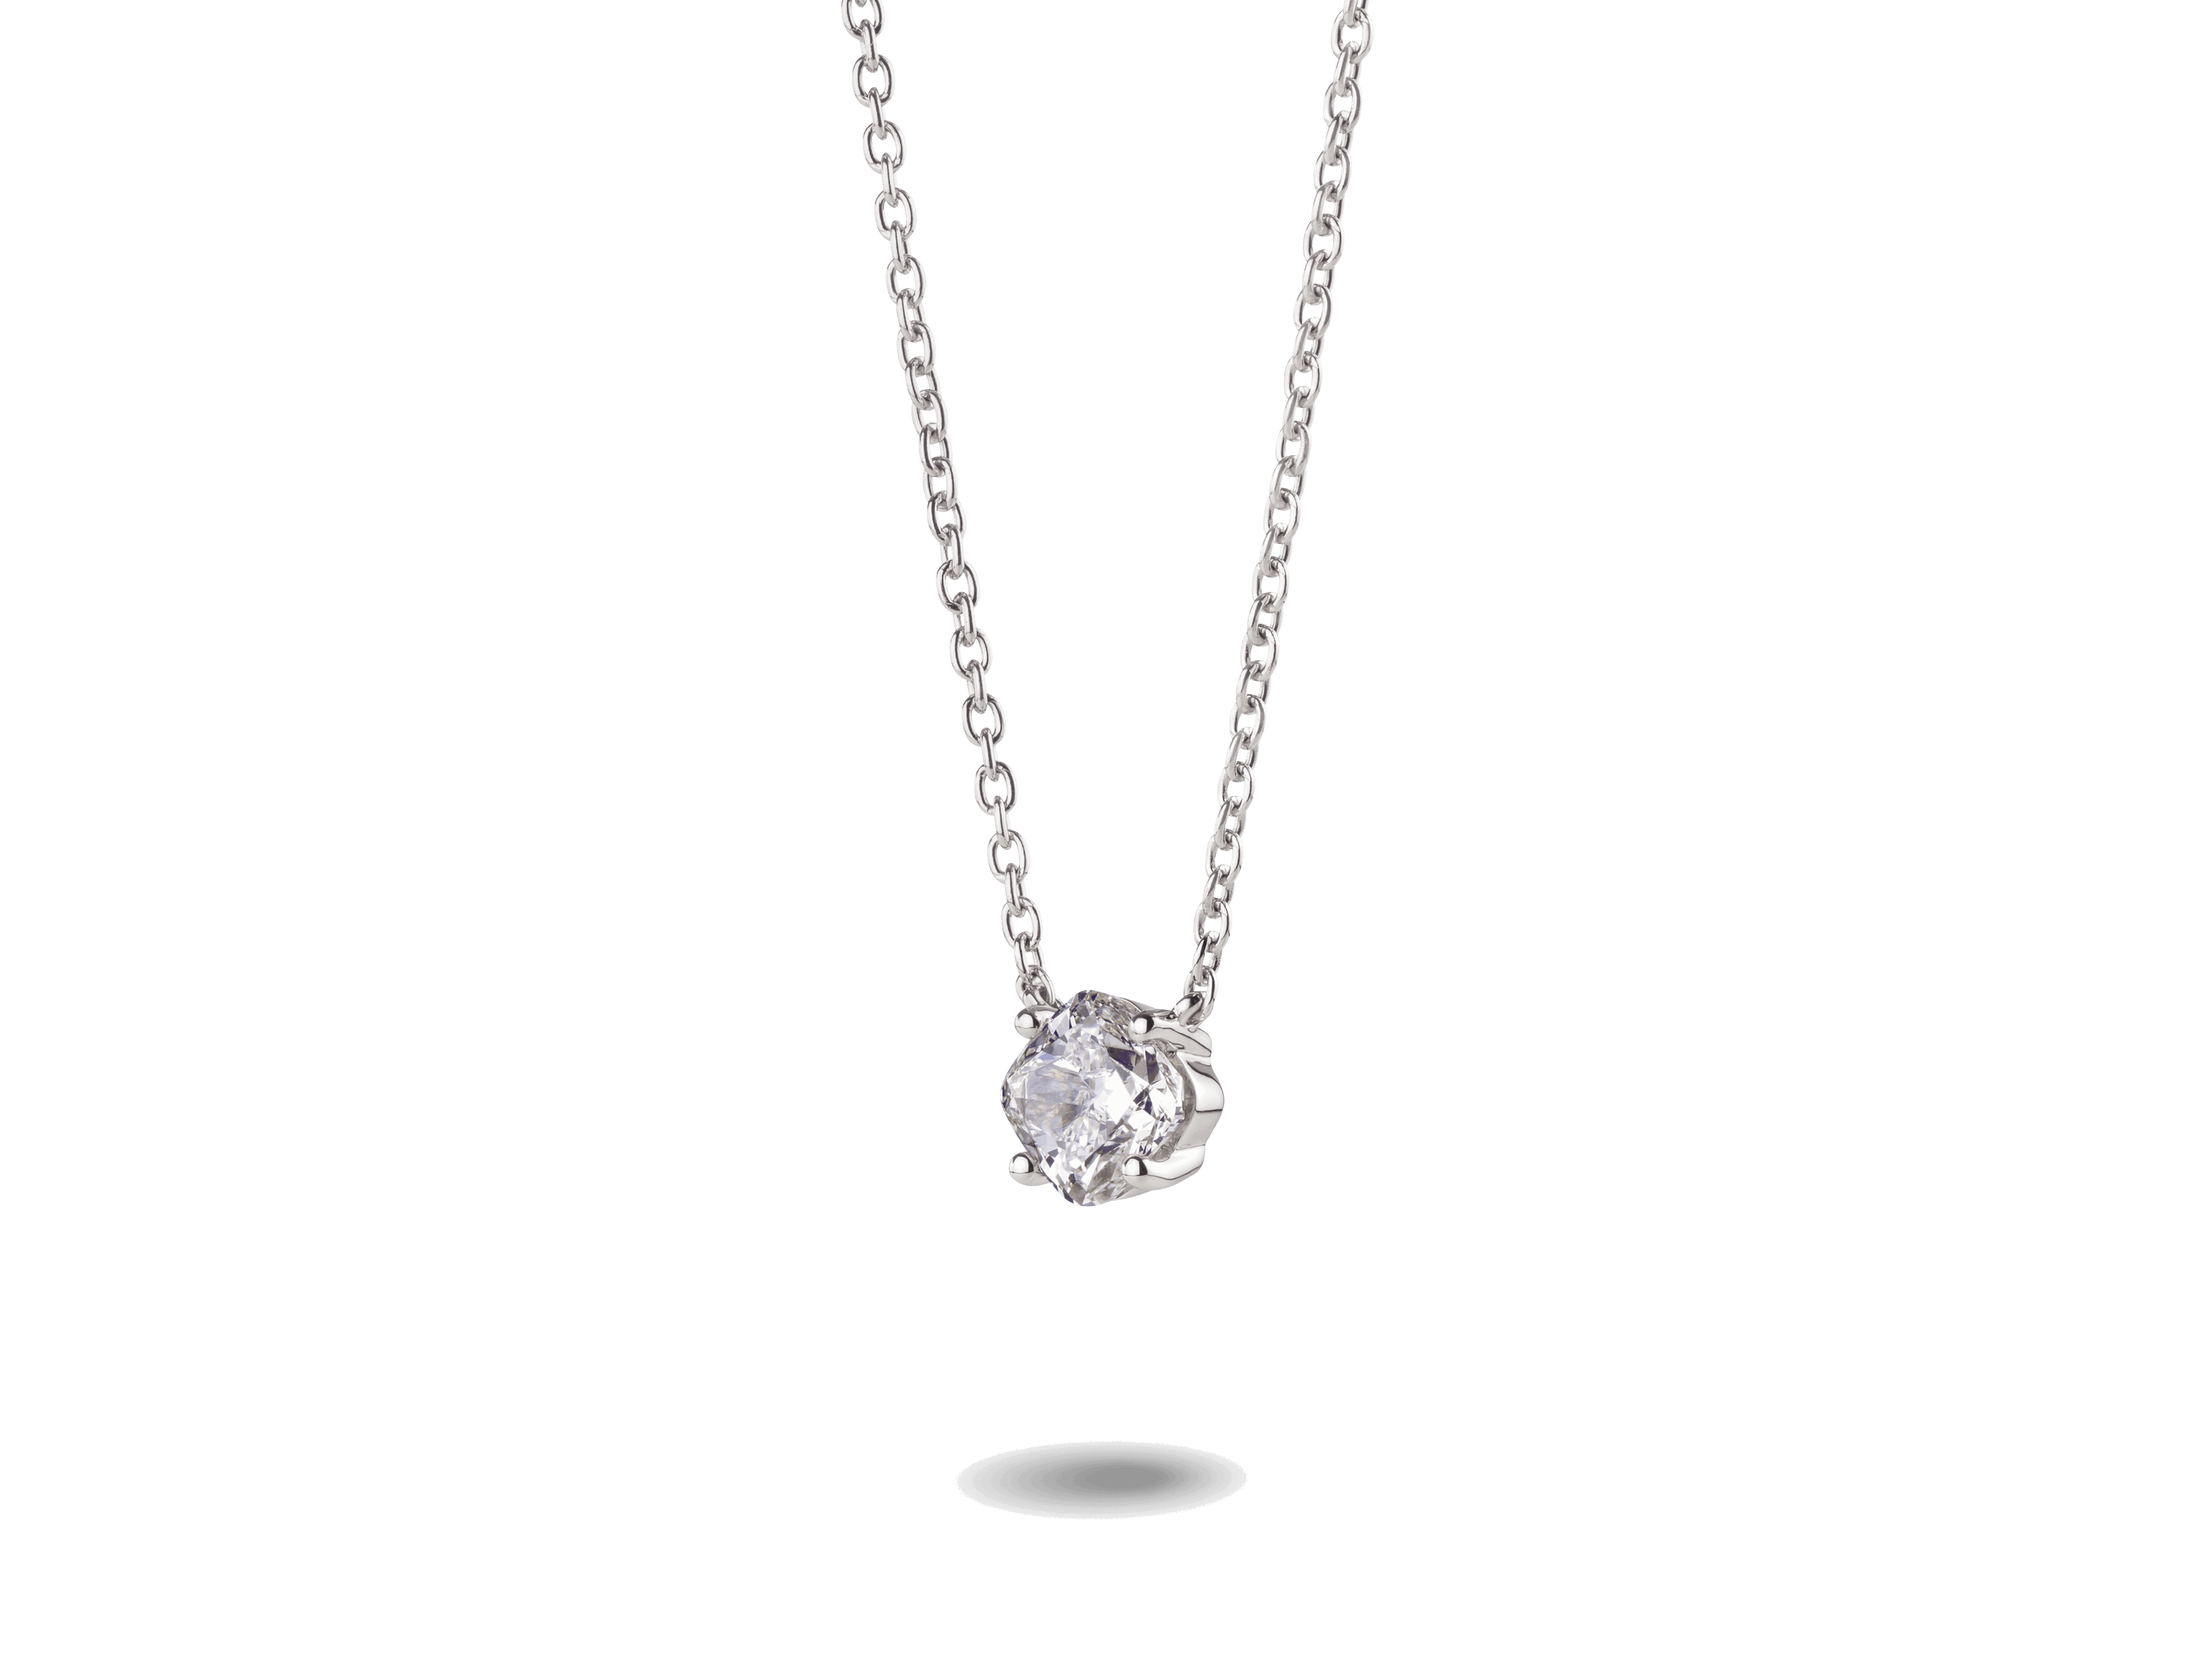 Side view of 1 carat white cushion cut pendant in 14k white gold